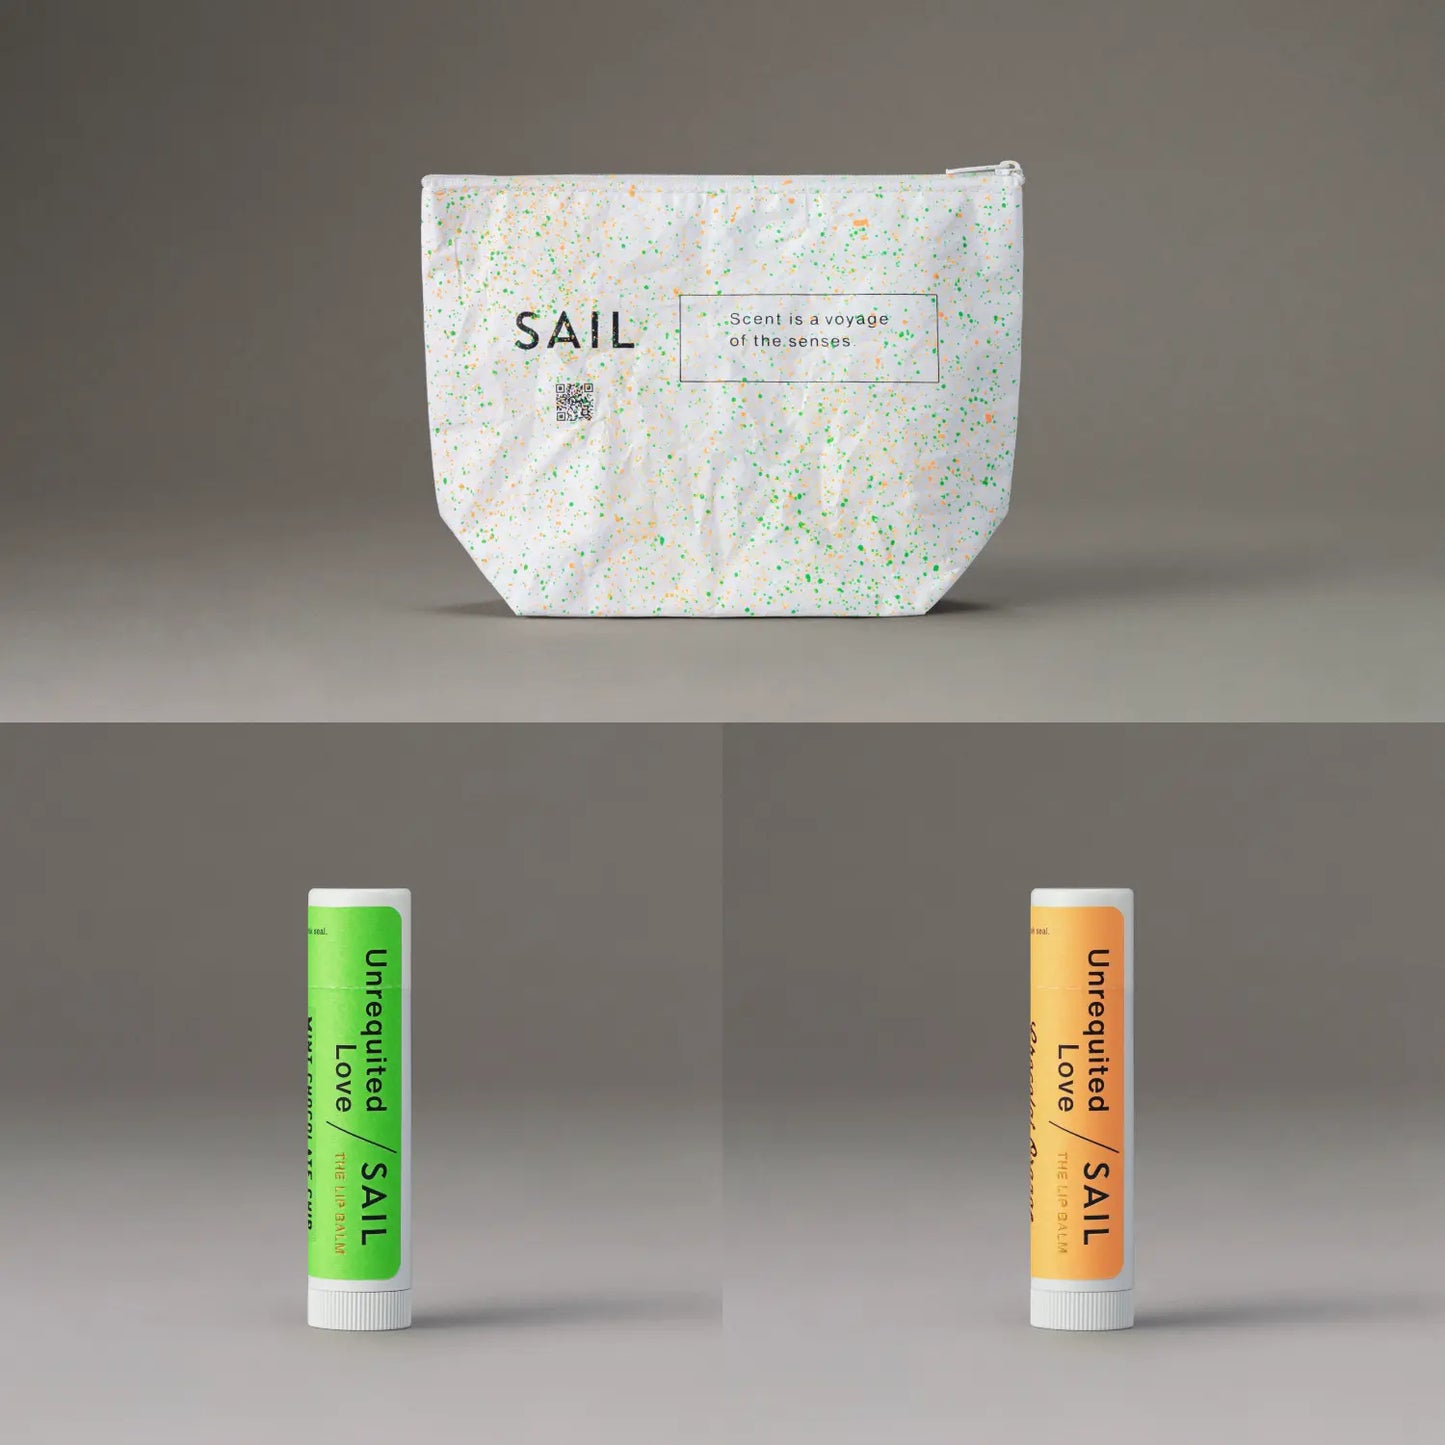 SAIL THE LIP BALM Unrequited Love "SPECIAL KIT"-C / THE LIP BALM Unrequited Love / Mint Chocolate Chip & THE LIP BALM Unrequited Love / Chocolat Orange